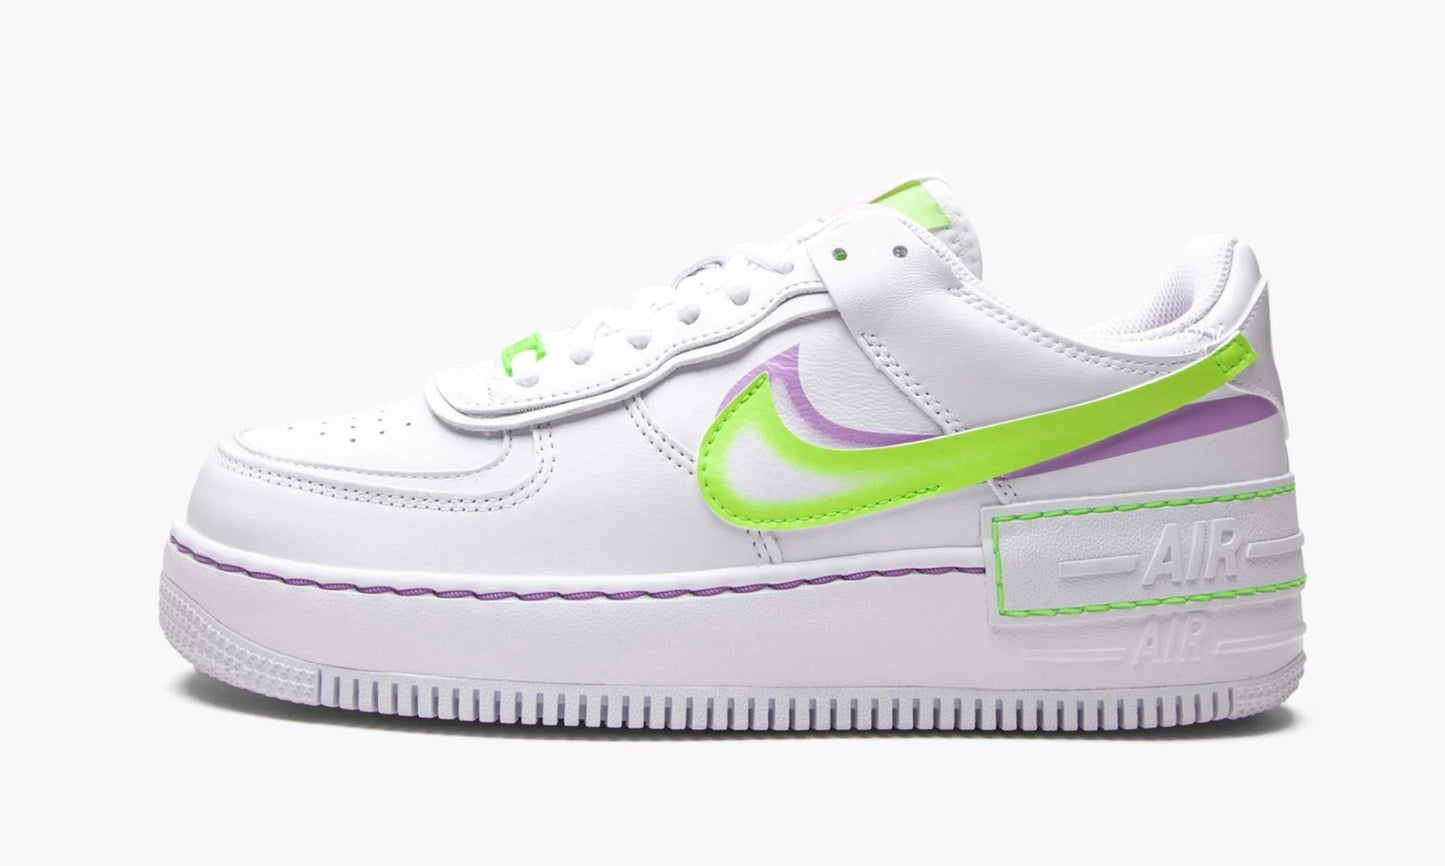 Force 1 Low Shadow WMNS “Electric Green”